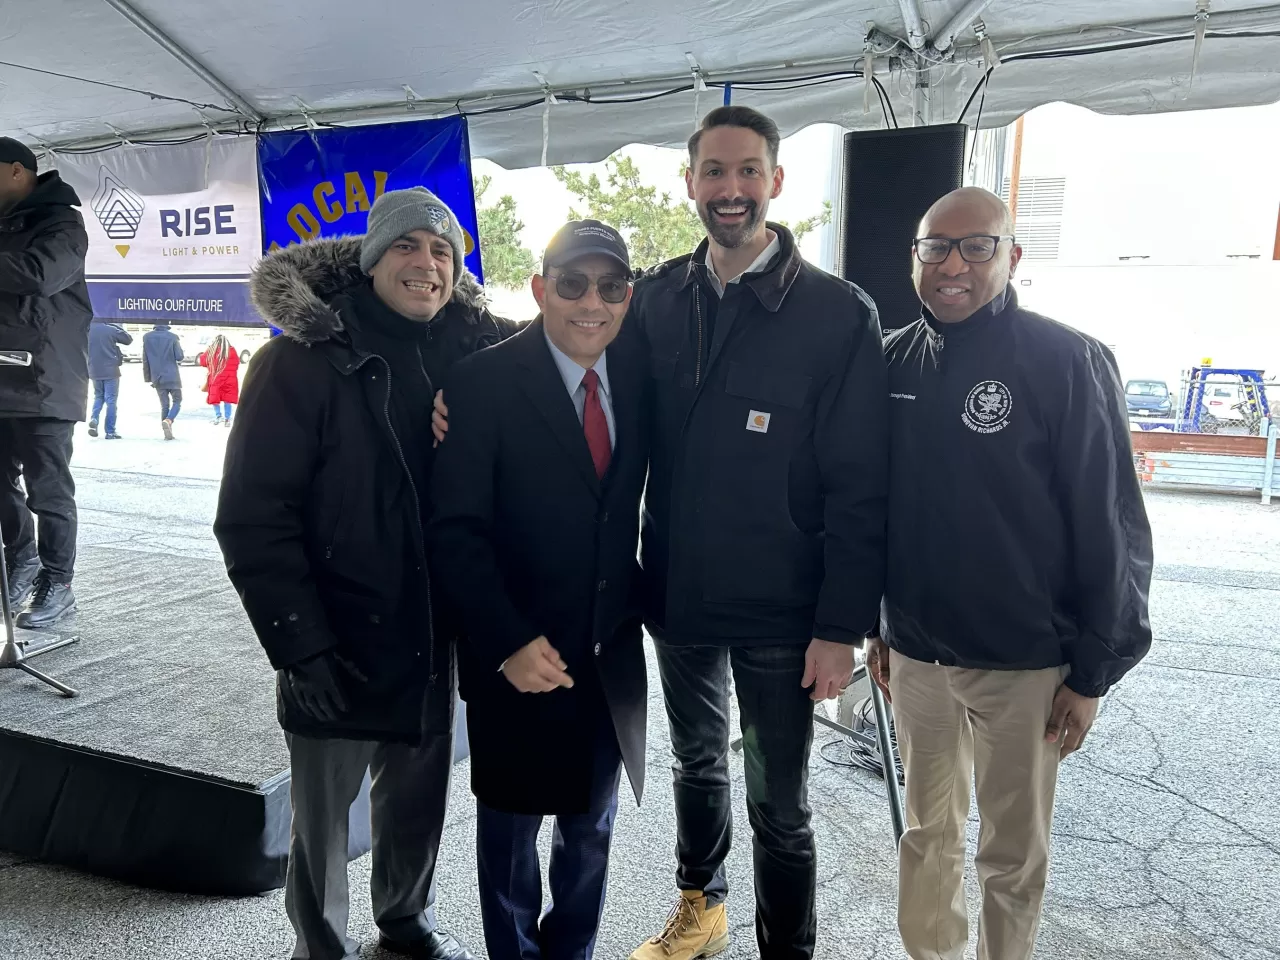 (L to R) Costa Constantinides, CEO, Variety Boys & Girls Club of Queens, Bishop Mitchell G. Taylor, Clint Plummer, CEO Rise Light & Power, Queens Borough President Donovan Richards Jr. img#3